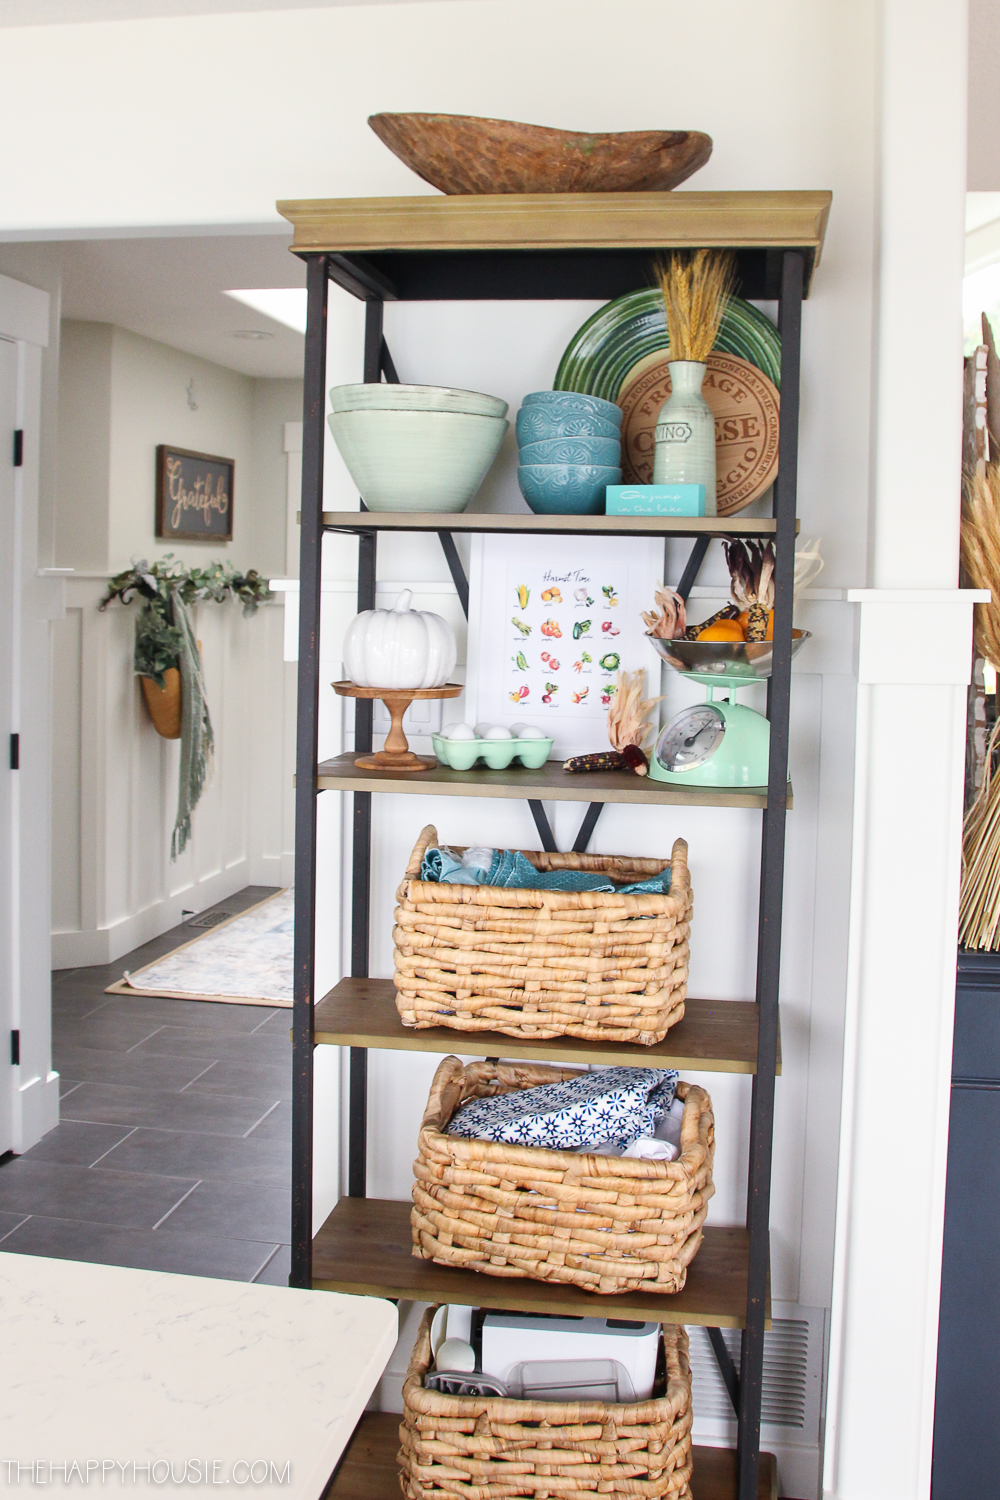 A wooden shelf off the kitchen with wicker baskets.